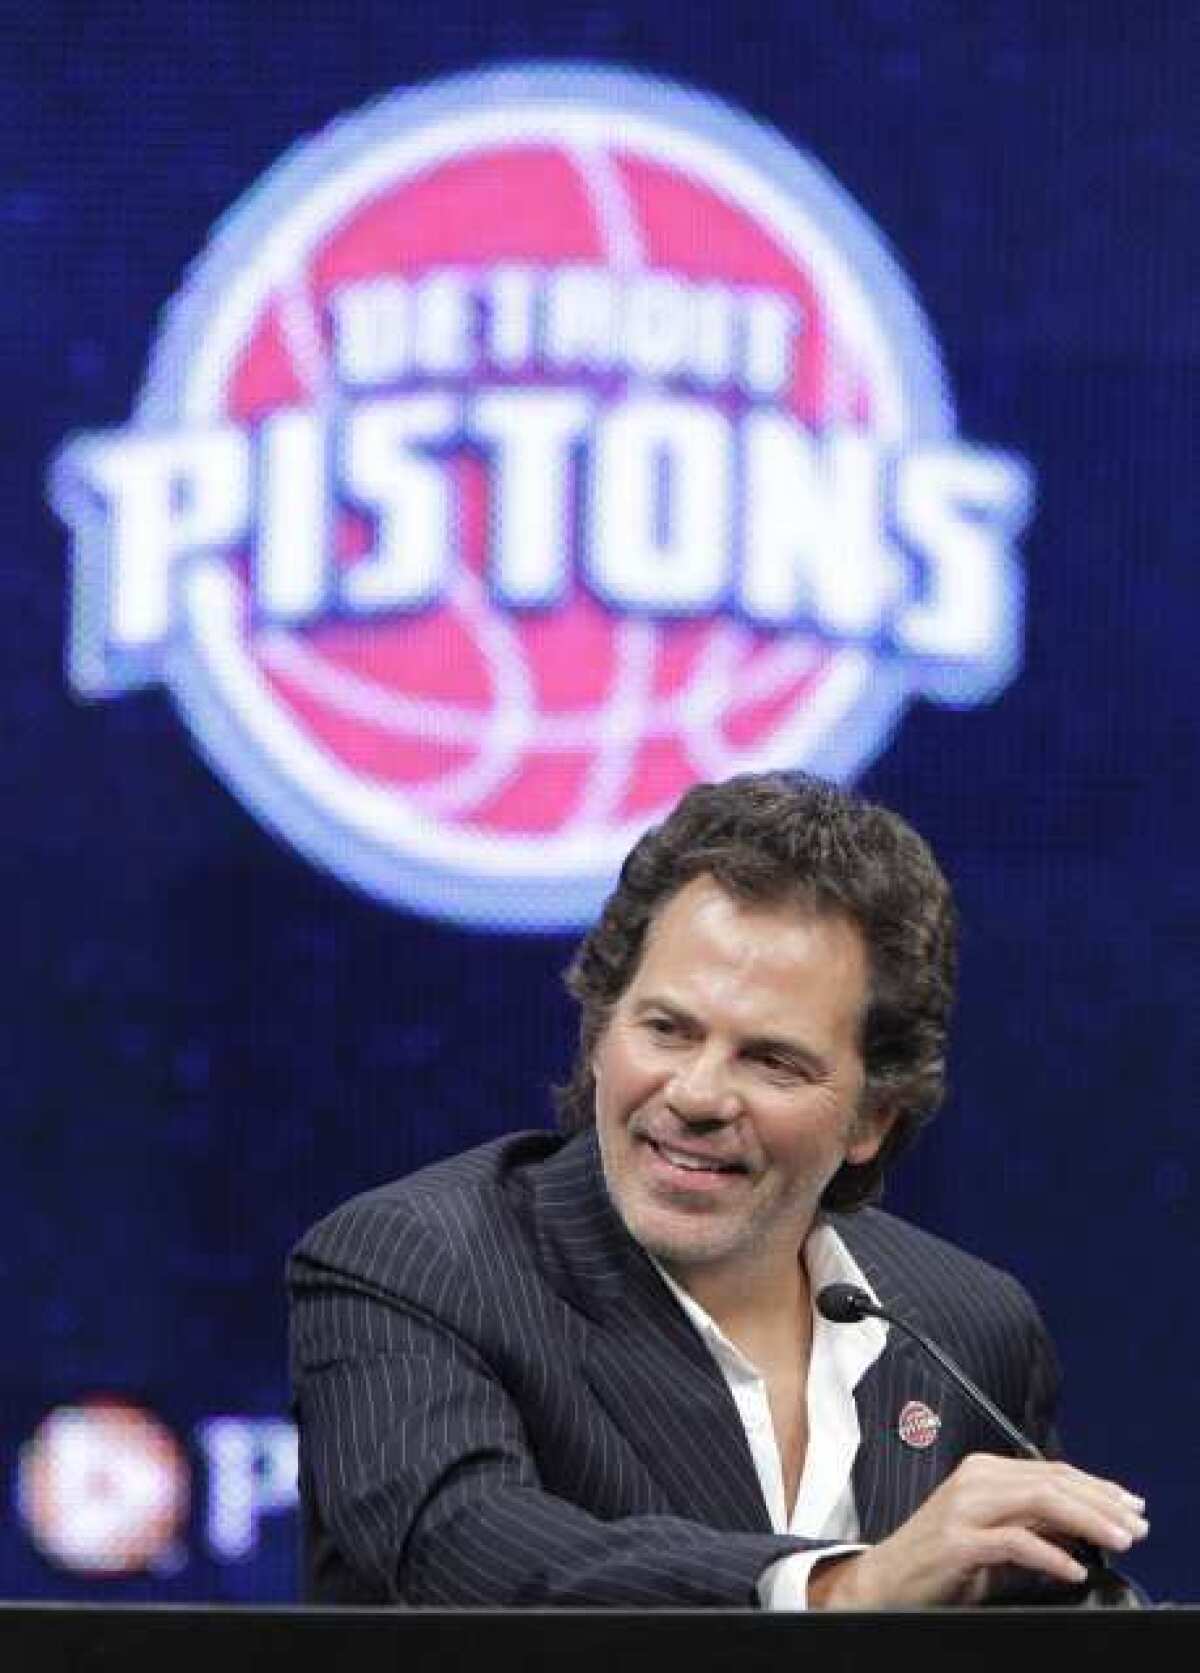 Detroit Pistons owner Tom Gores addresses the media at the Palace of Auburn Hills in Auburn Hills, Mich.